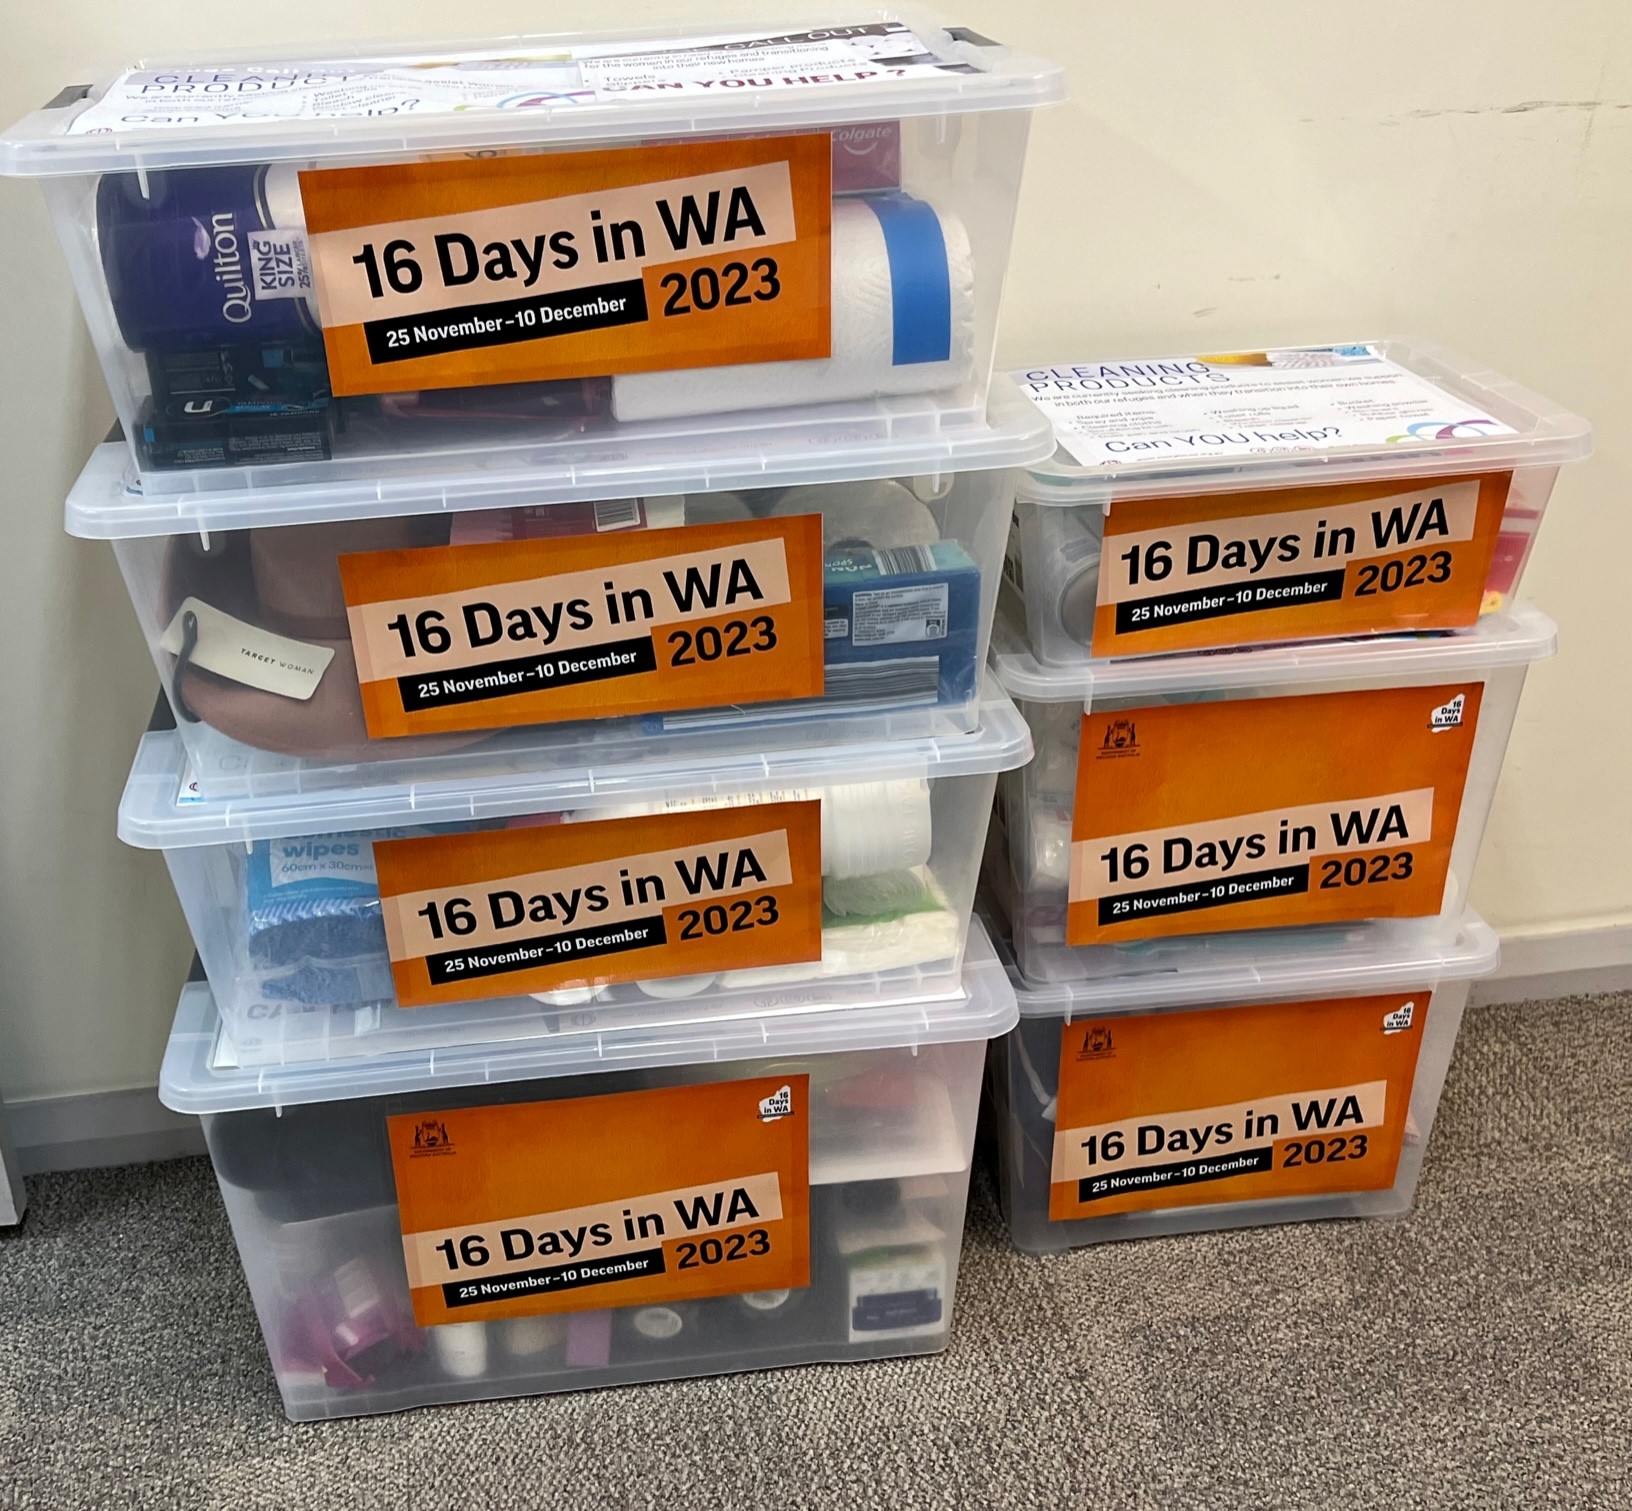 MCB staff filled seven containers of donations for vulnerable women and families during 16 Days in WA campaign